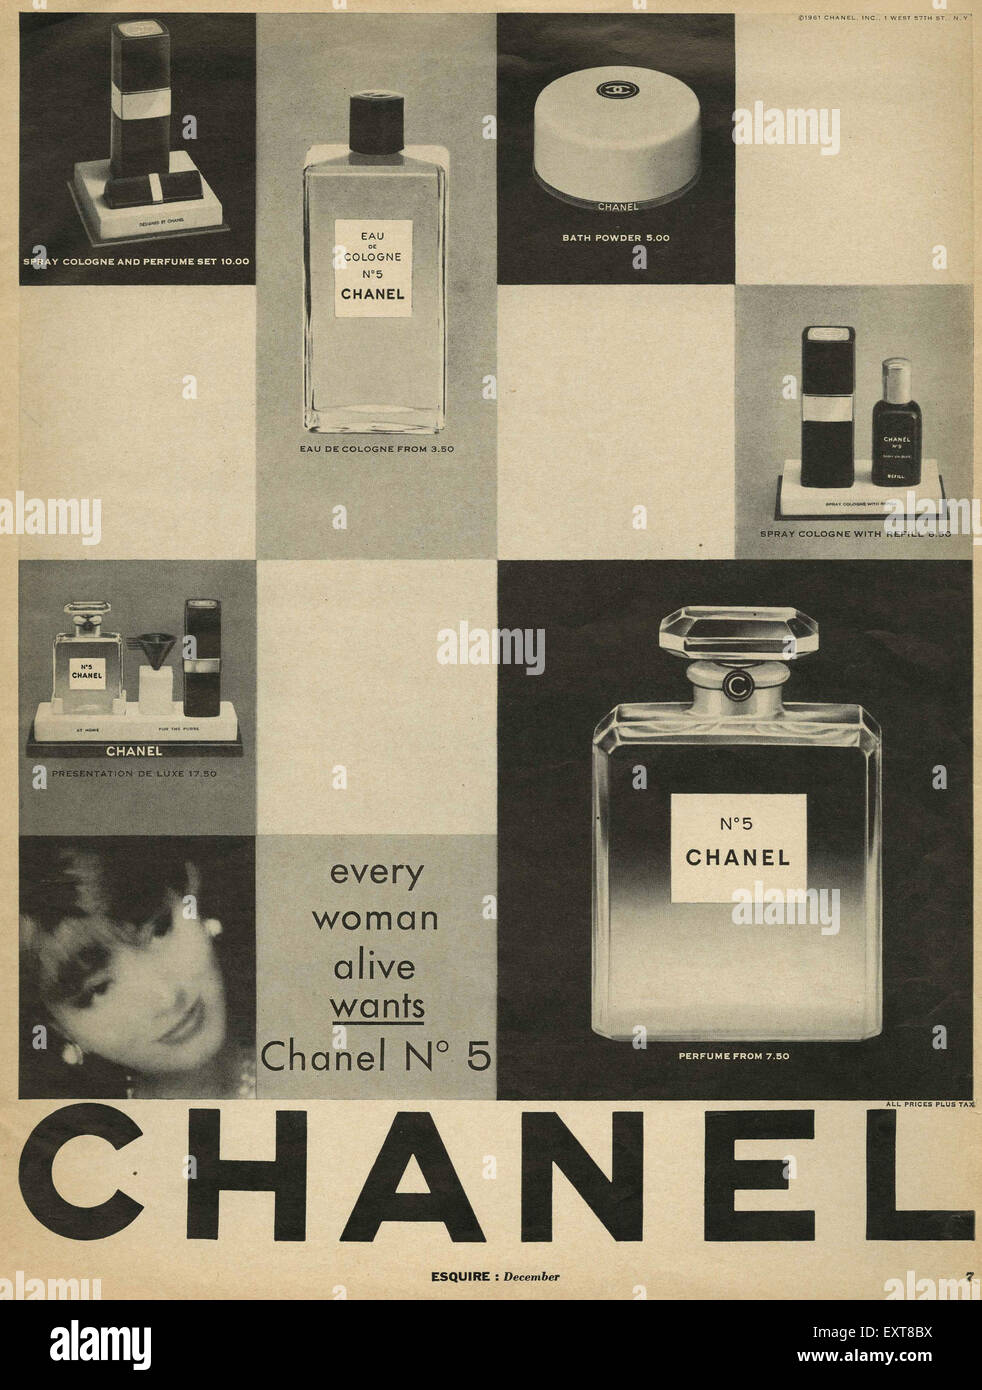 Chanel N° 5 is Green - Excellence Magazine